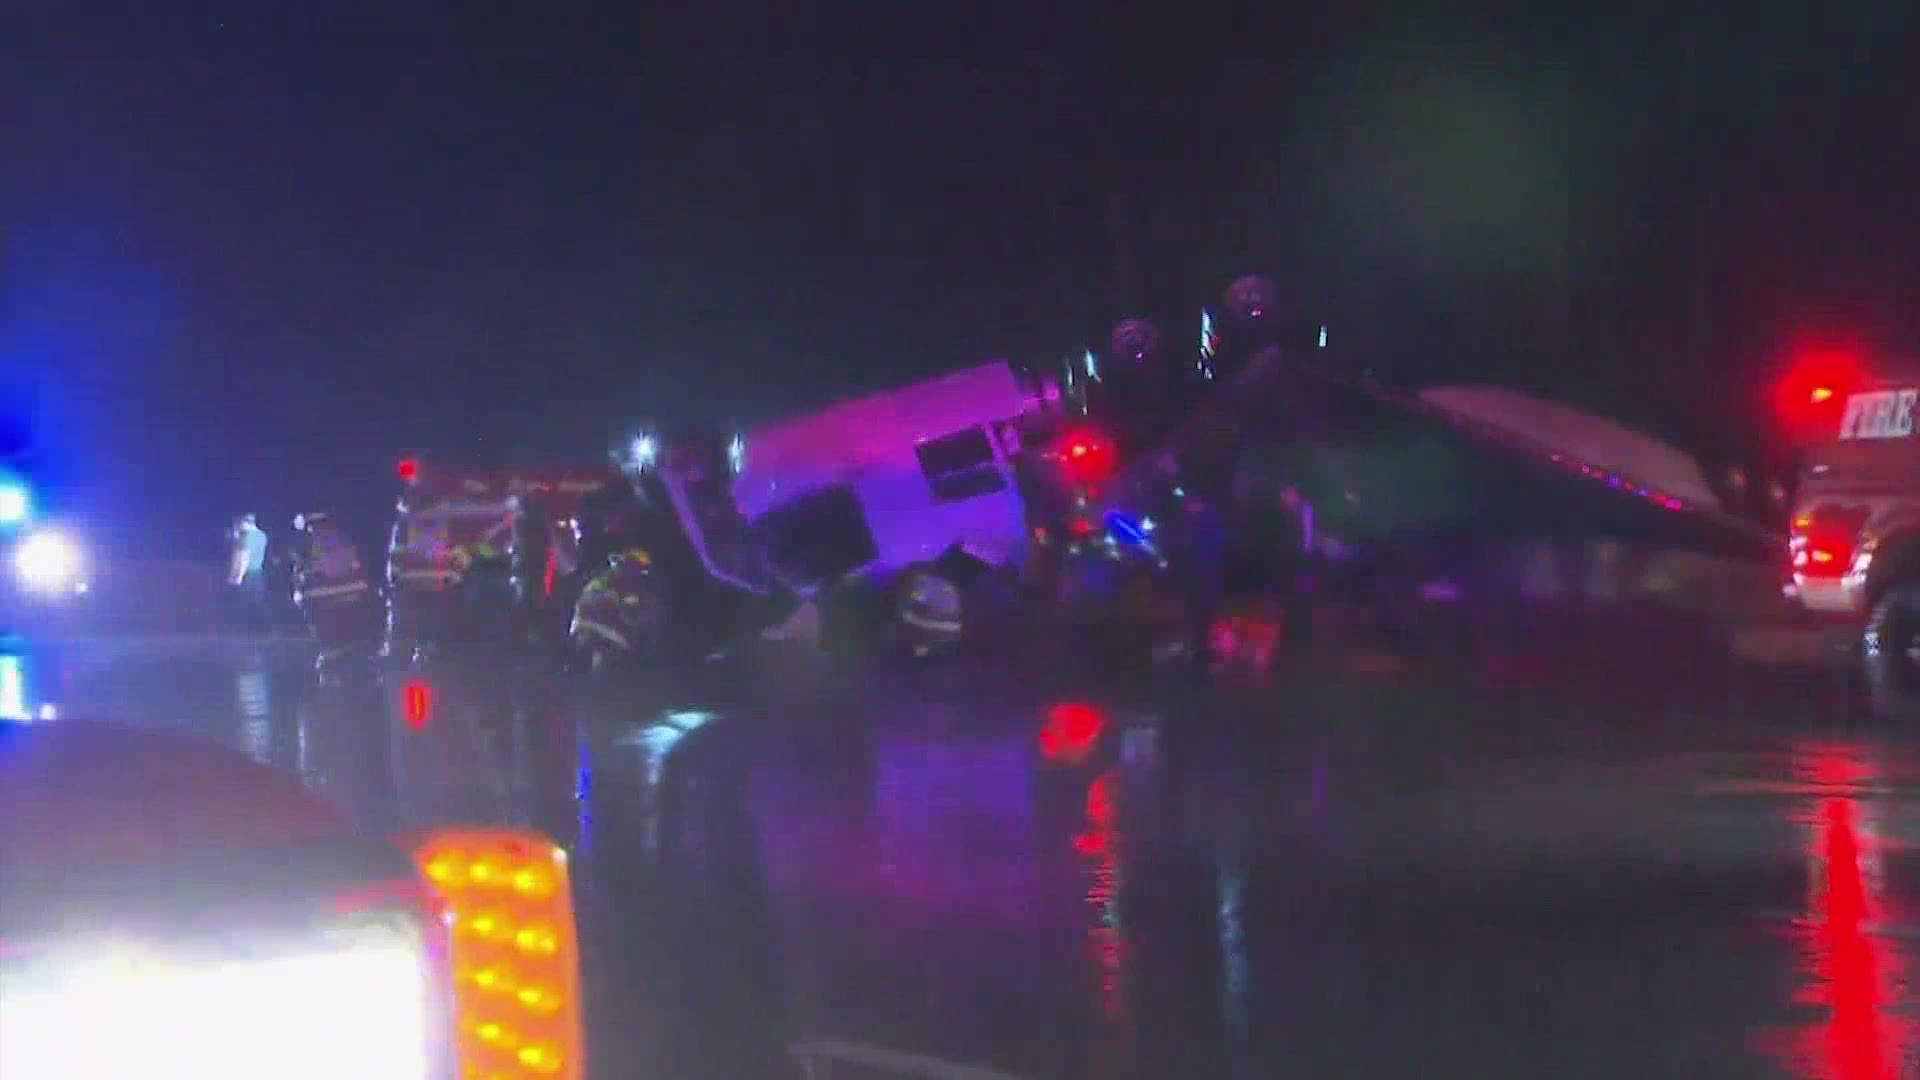 KHOU11's Brandi Smith reports on the overnight damage along I-35 in North Texas.